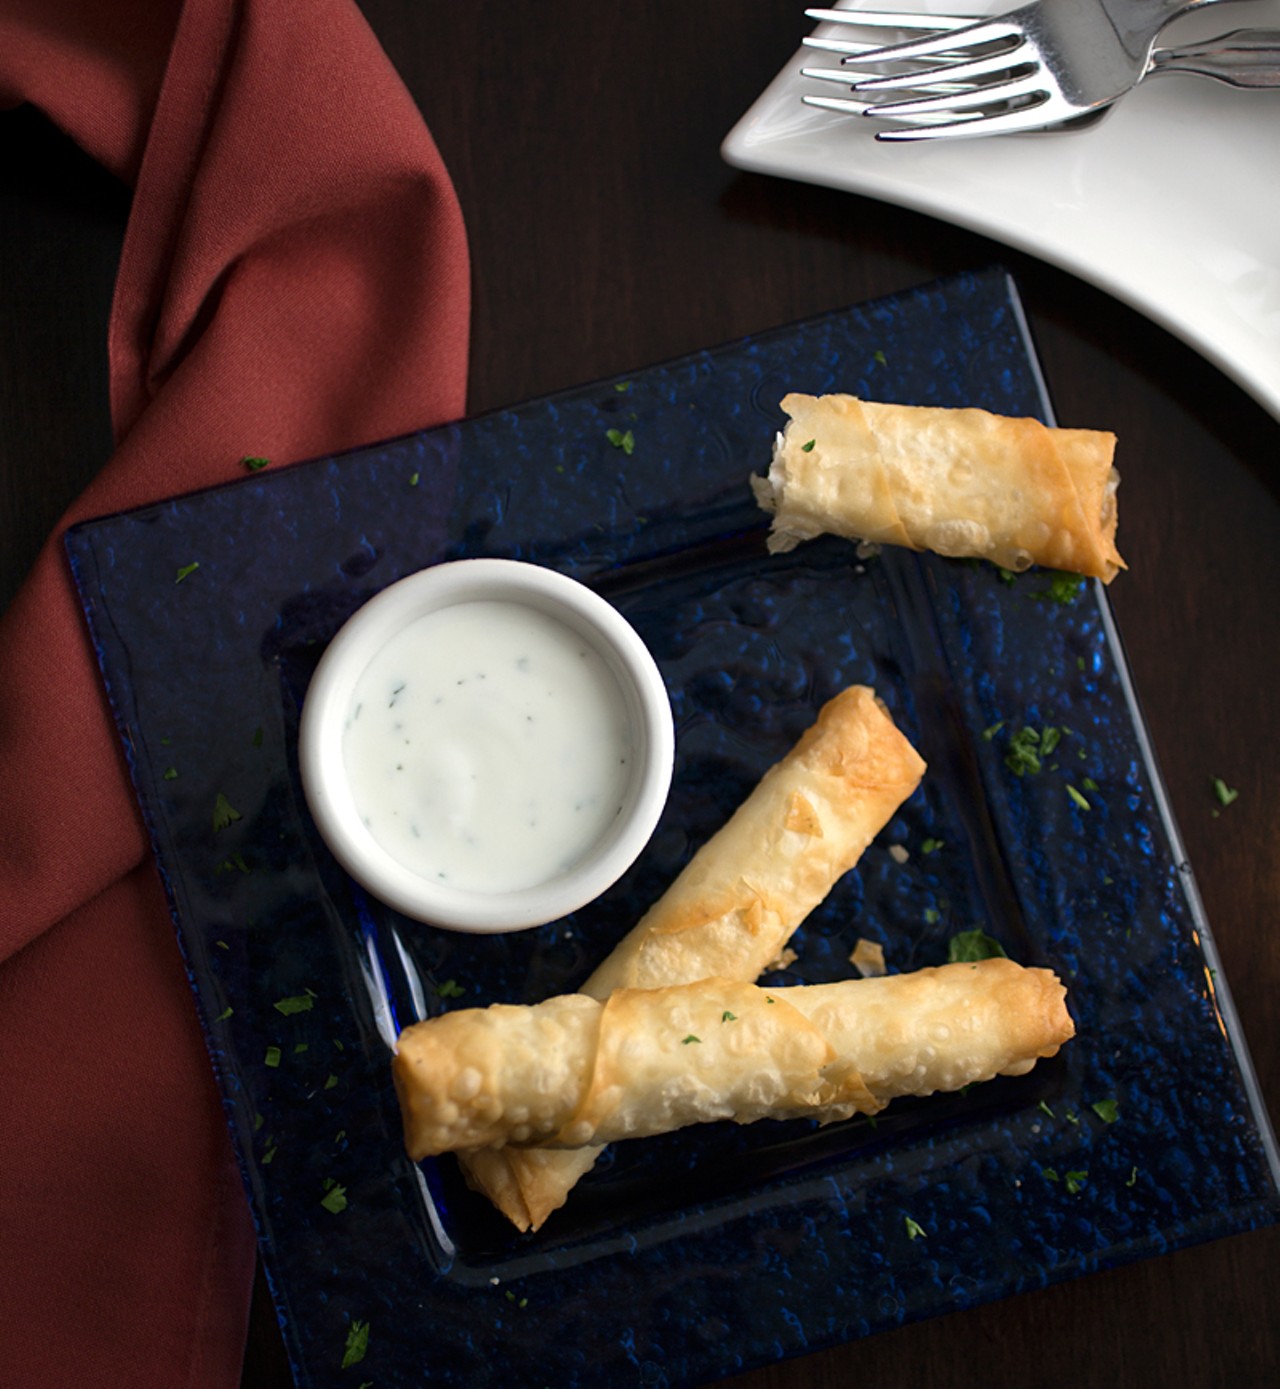 Phyllo cigars: phyllo dough stuffed with feta and herbs.